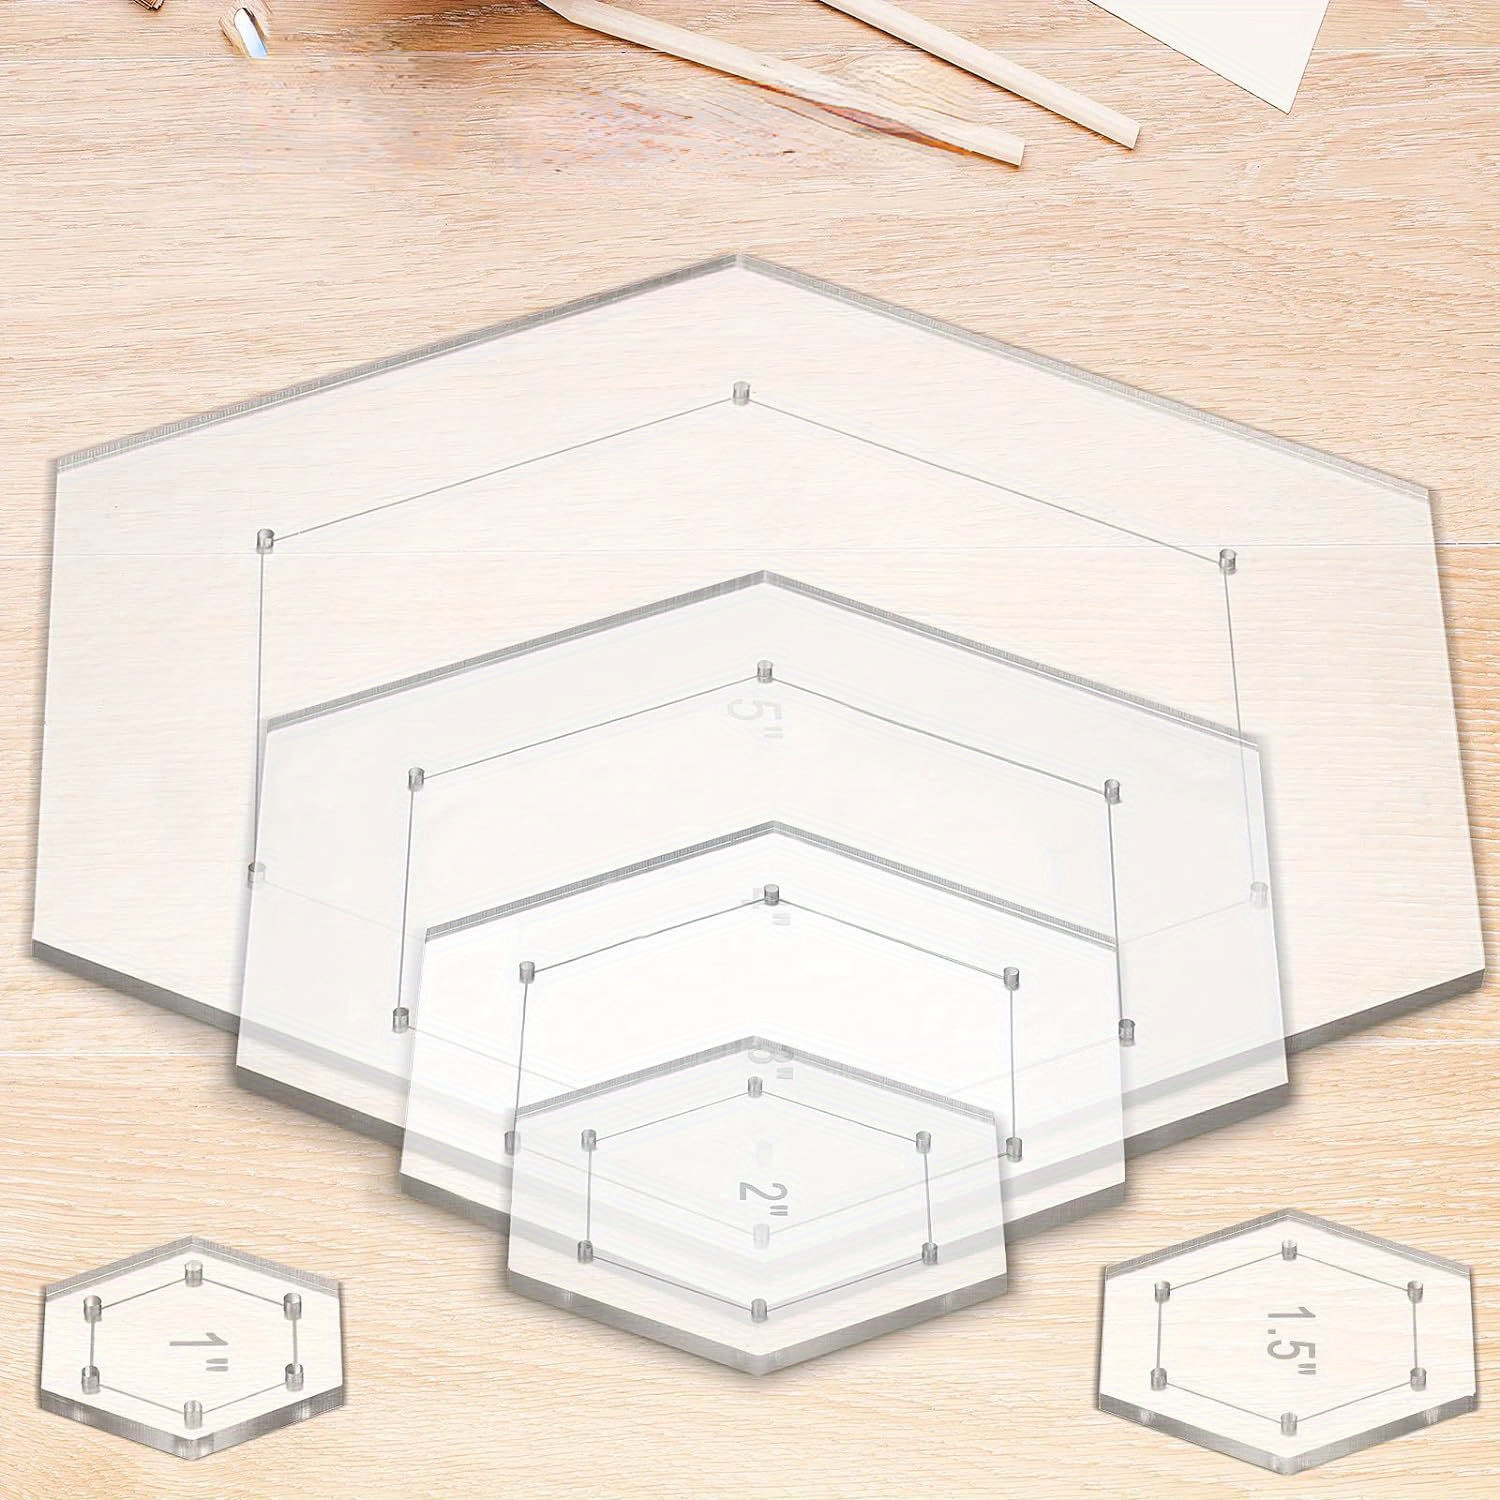 

6pcs Hexagon Quilting Templates 1 Inch, 1.5 Inch, 2 Inch, 3 Inch, 4 Inch, 5 Inch With 1/4 Inch Seam Allowance, Acrylic Quilting Templates For Diy Quilting Sewing Crafts